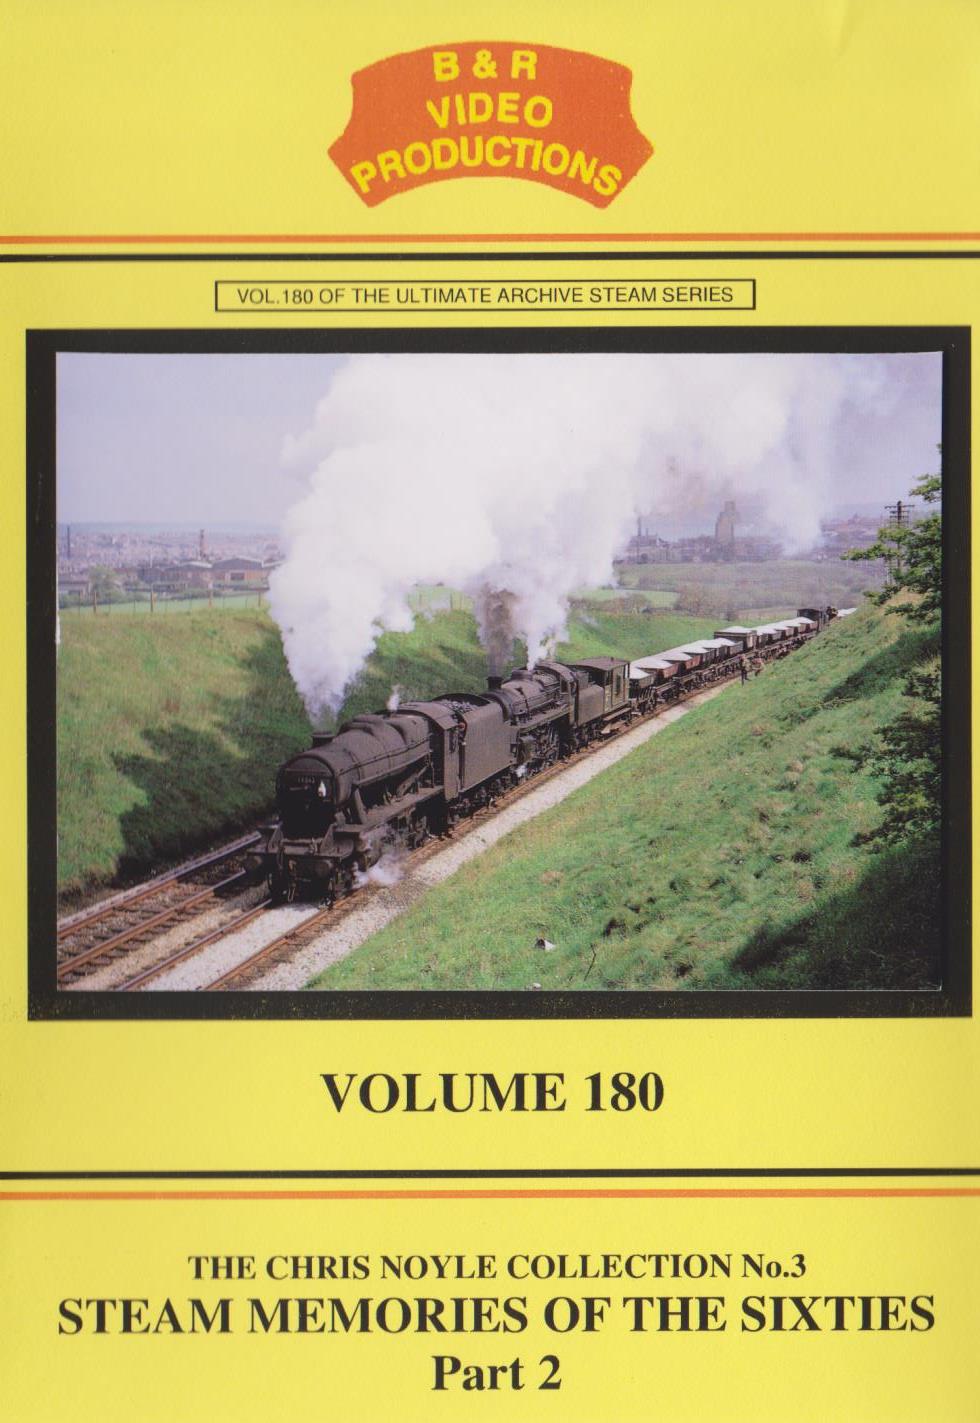 B & R Video Productions Vol 180 - The Chris Noyle collection N0.3 Steam memories of the sixties Part 2 